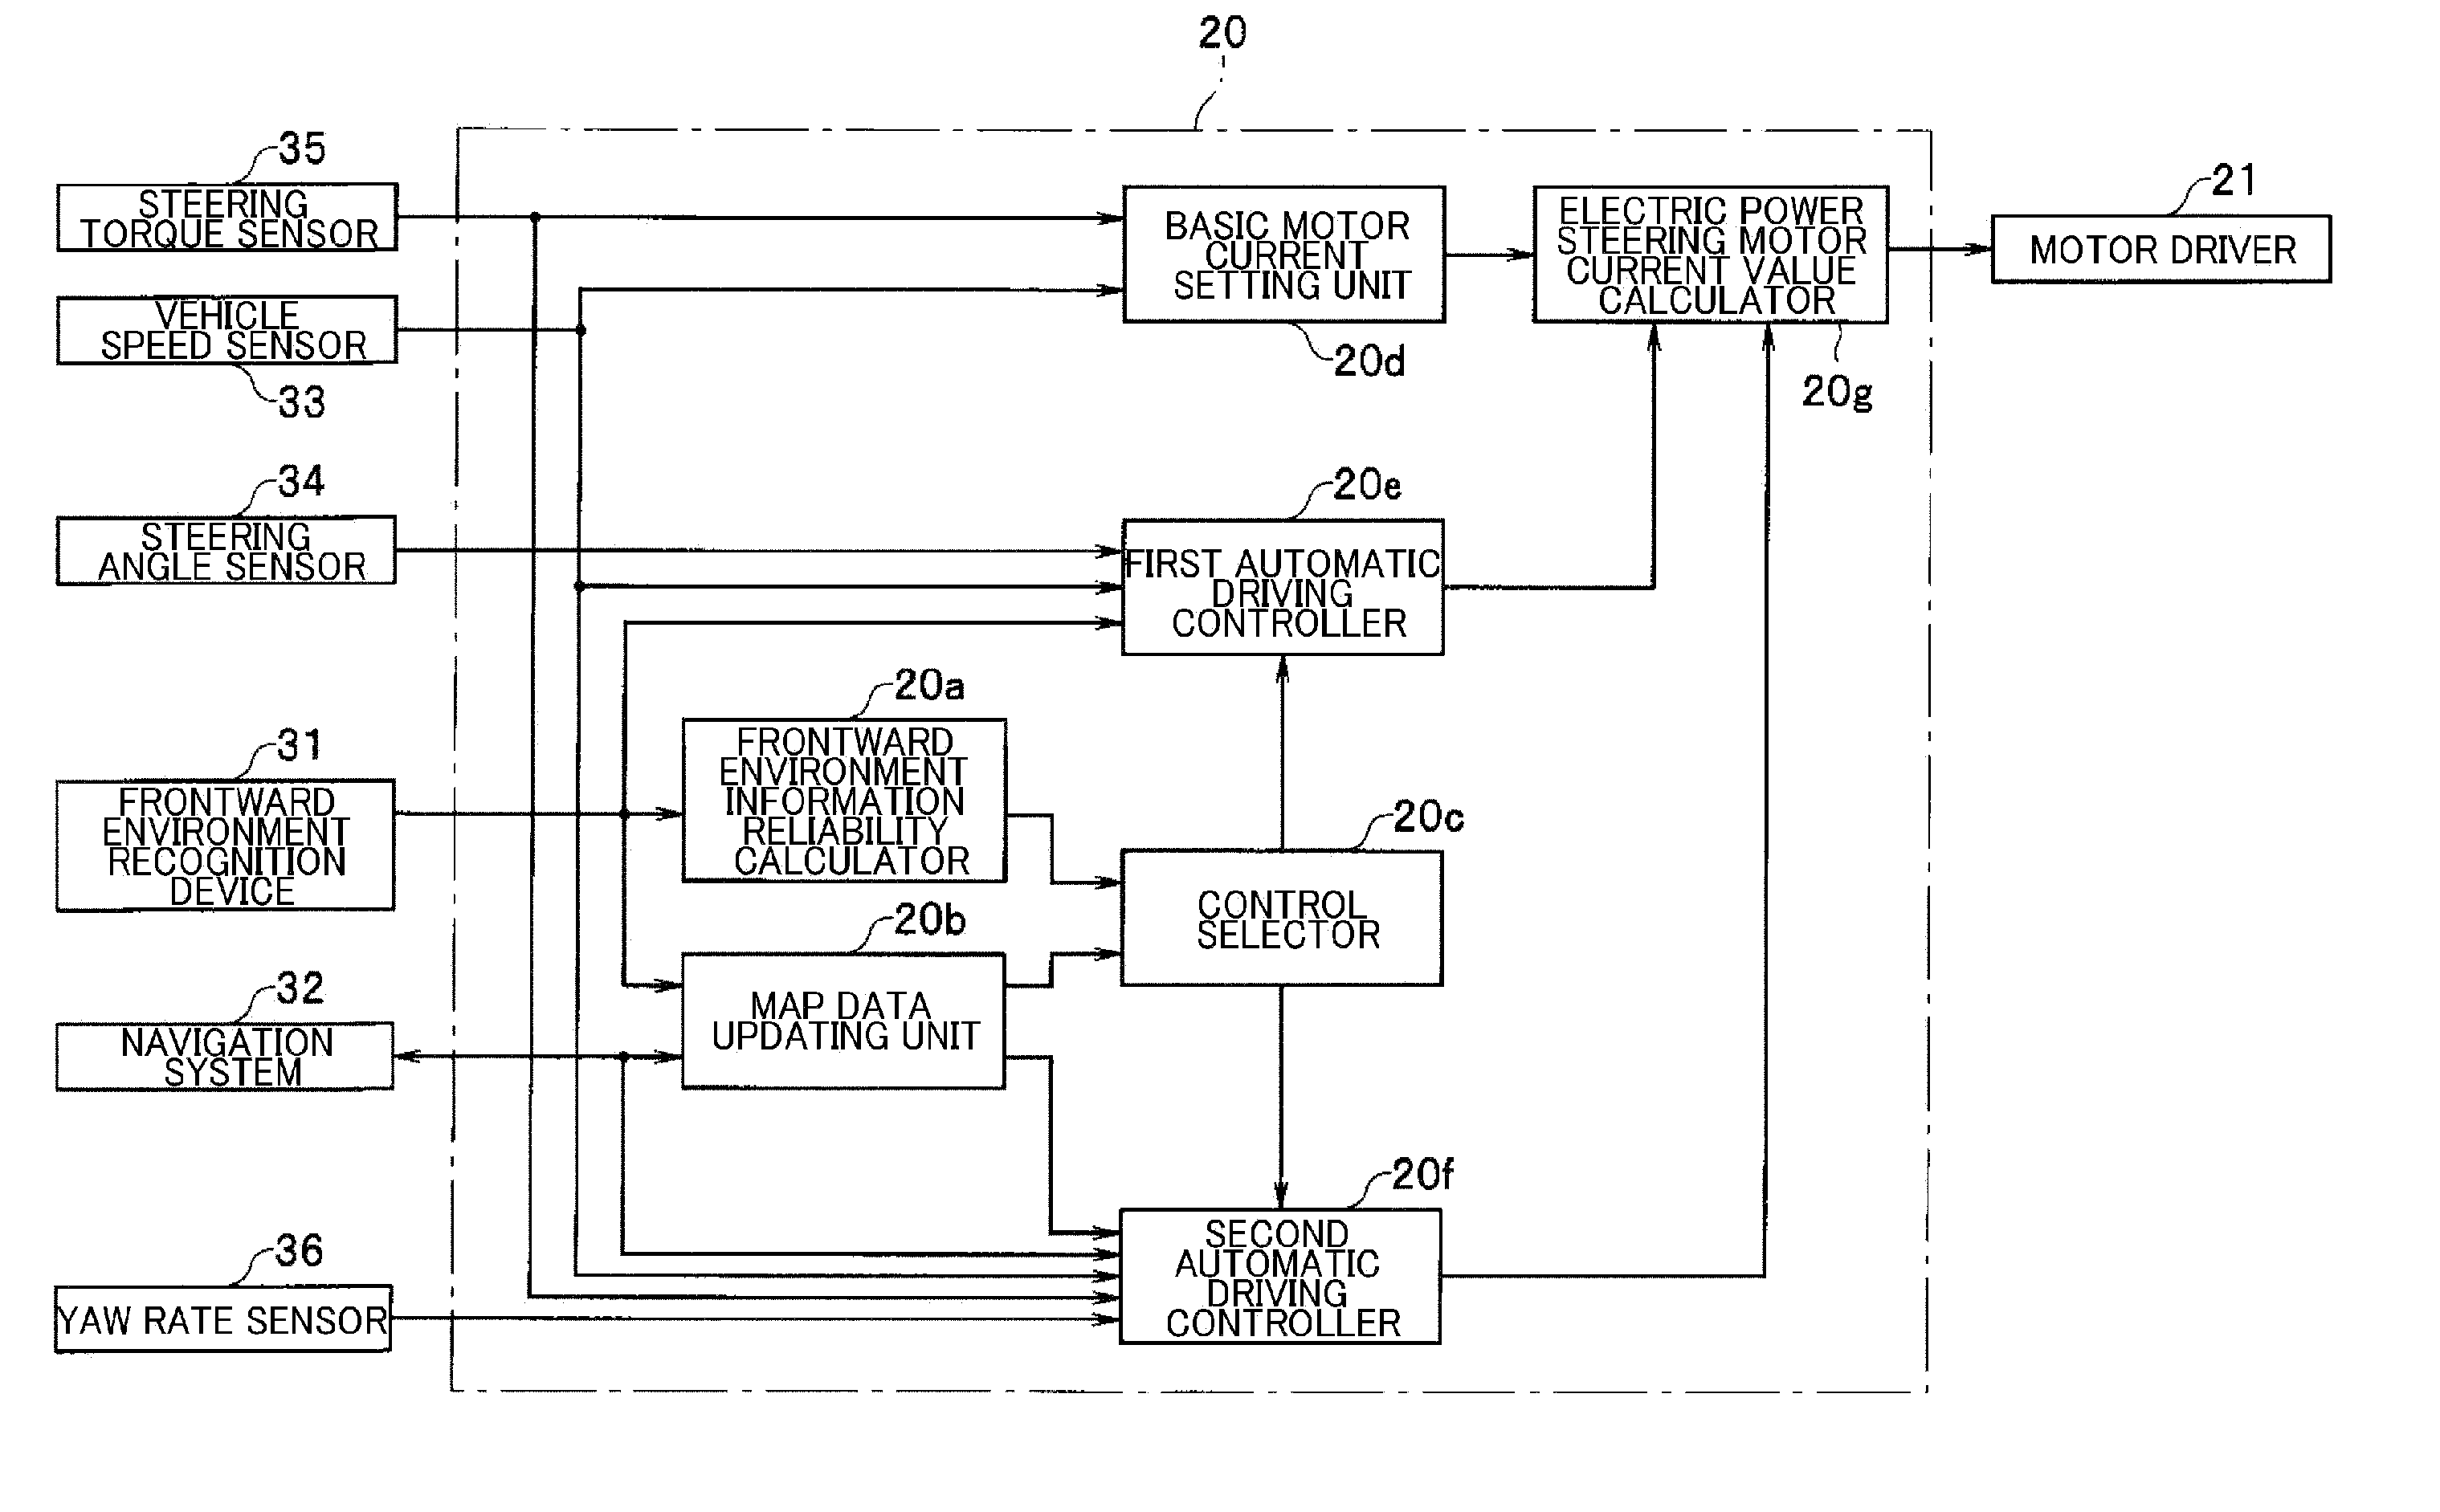 Travel control apparatus for vehicle